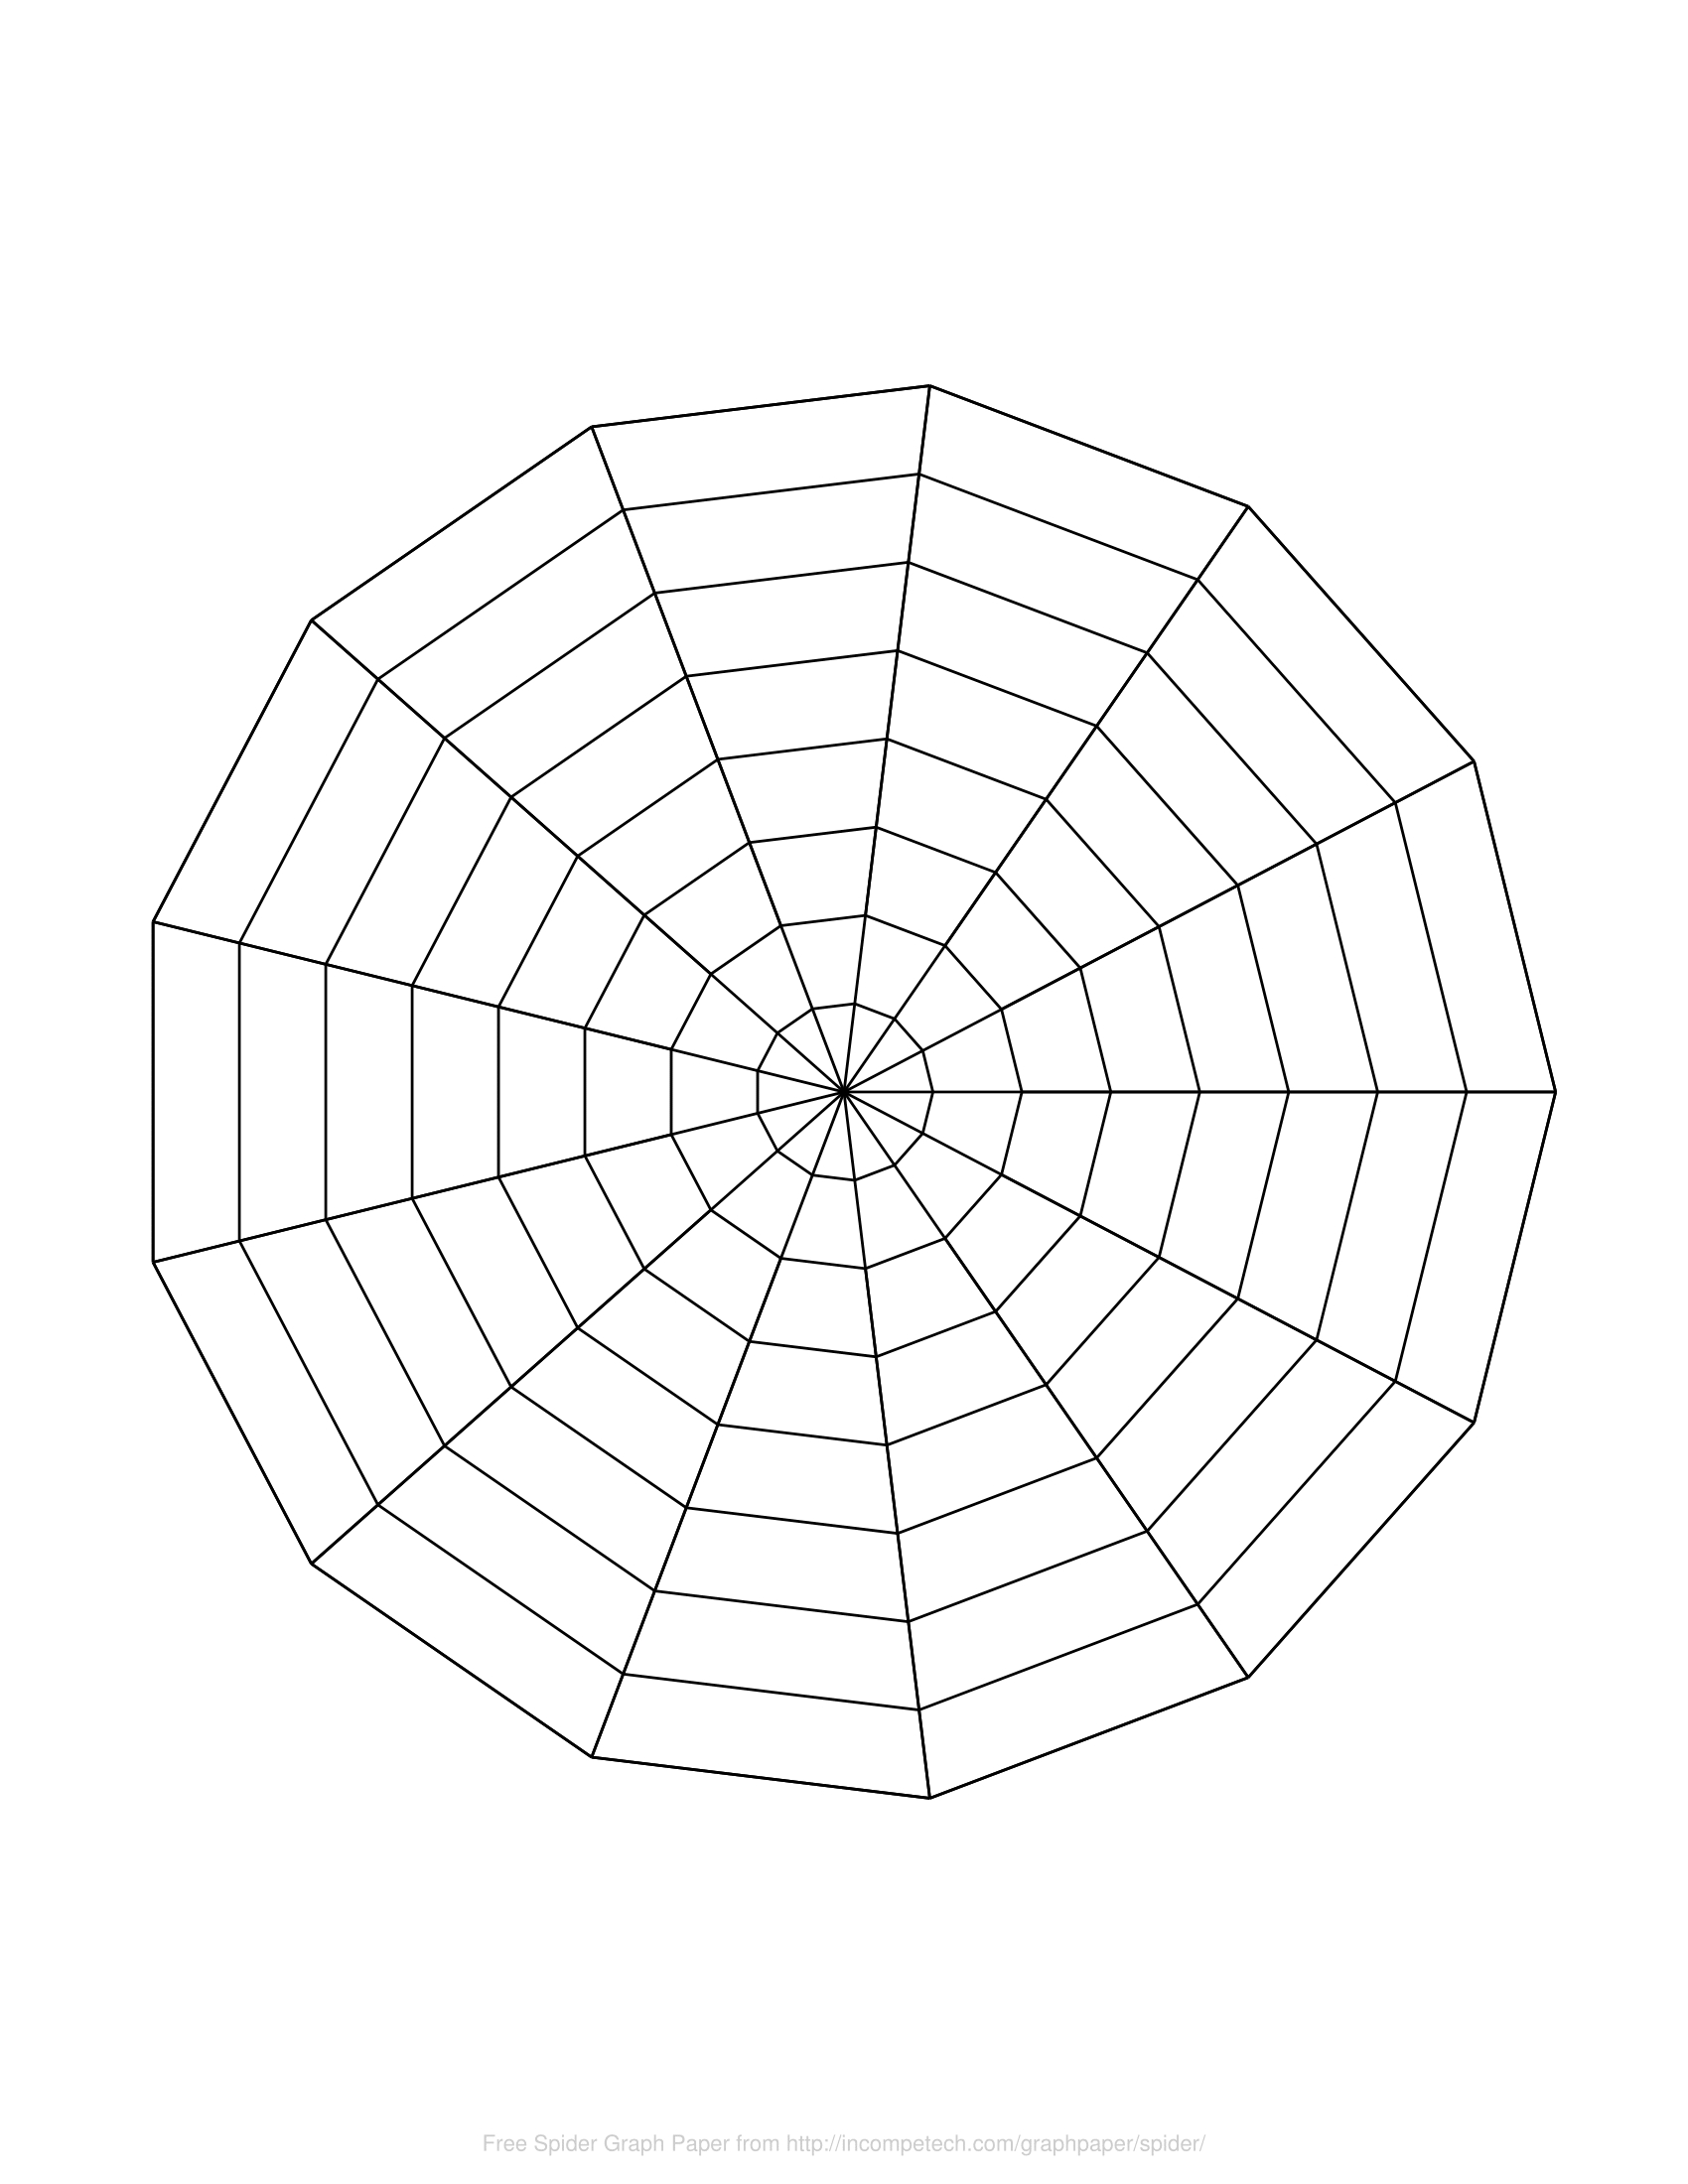 Free Online Graph Paper / Spider Within Blank Radar Chart Template